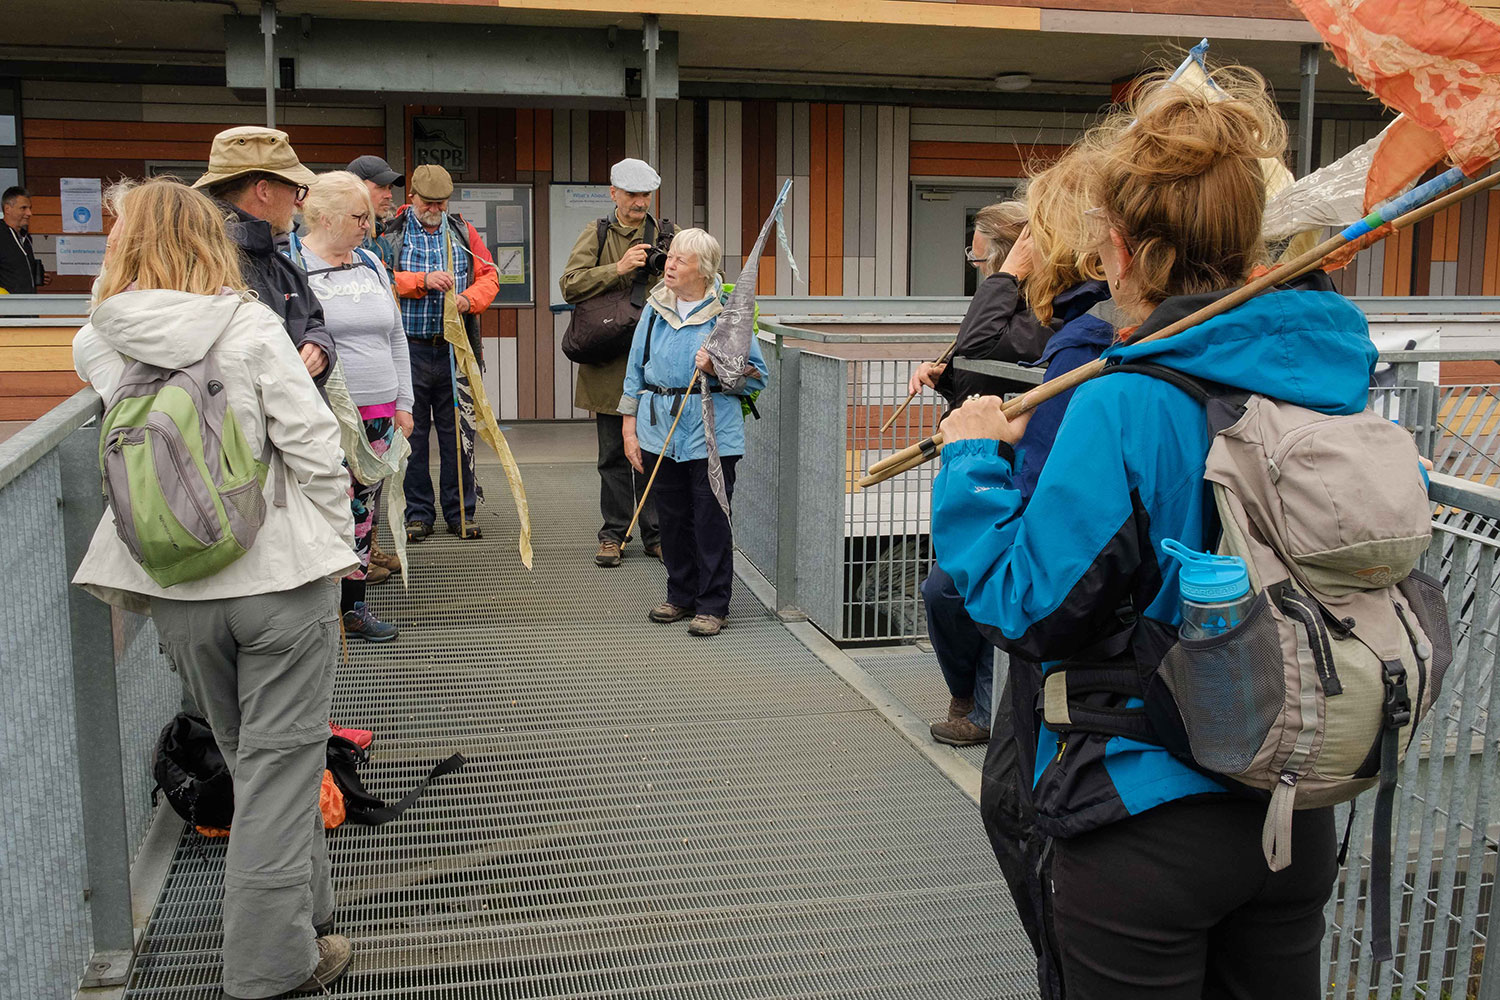 Lesley Robinson speaks to a group of walkers outside the RSPB Rainham Marshes visitor centre